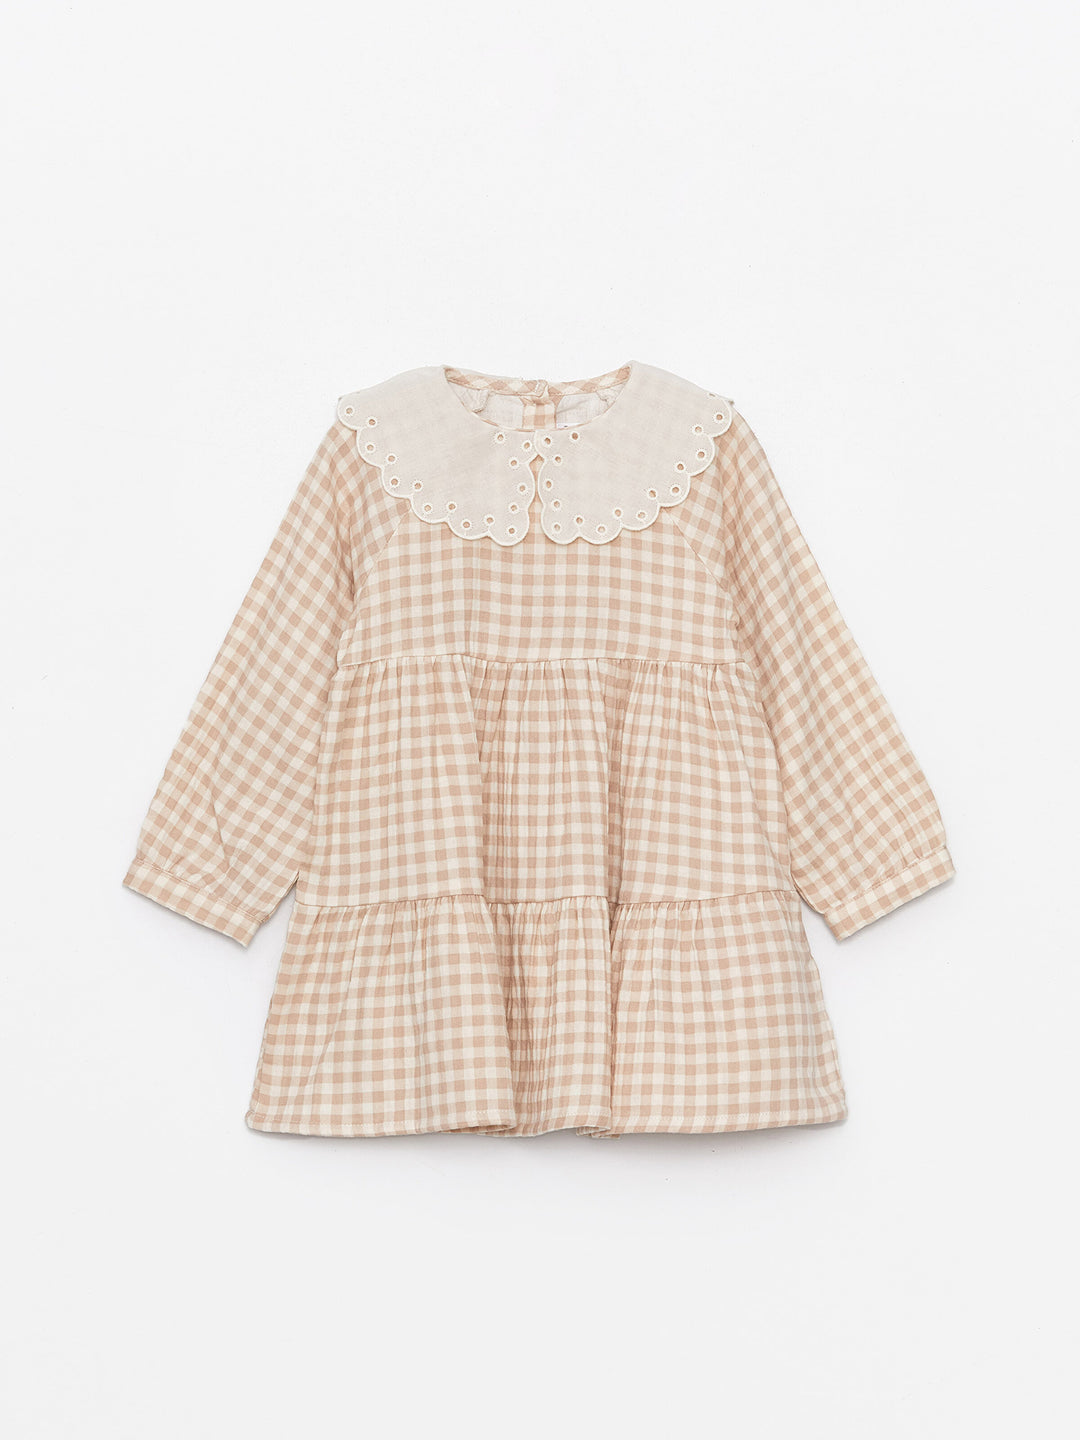 Crew Neck Long Sleeve Plaid Patterned Baby Girls Dress